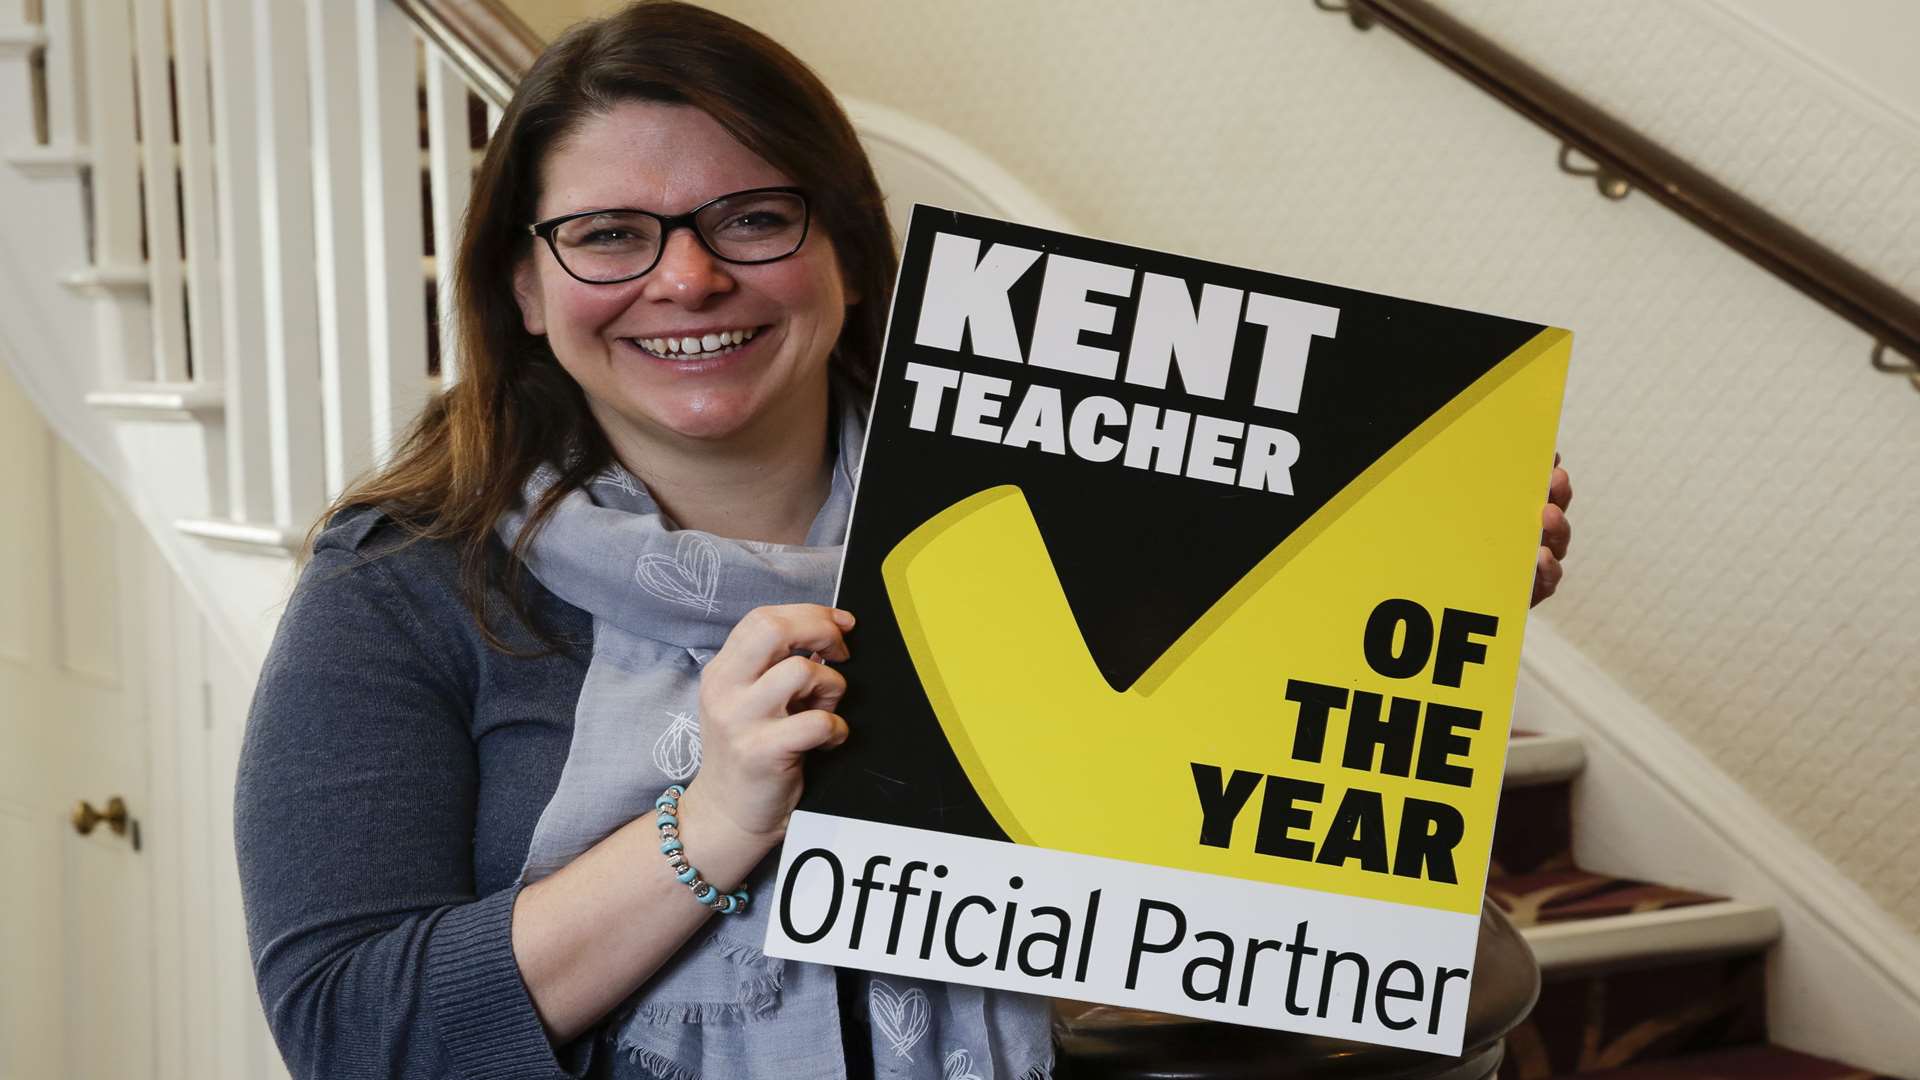 Rebecca Smith of Social Enterprise Kent at the Teacher of the Year launch.